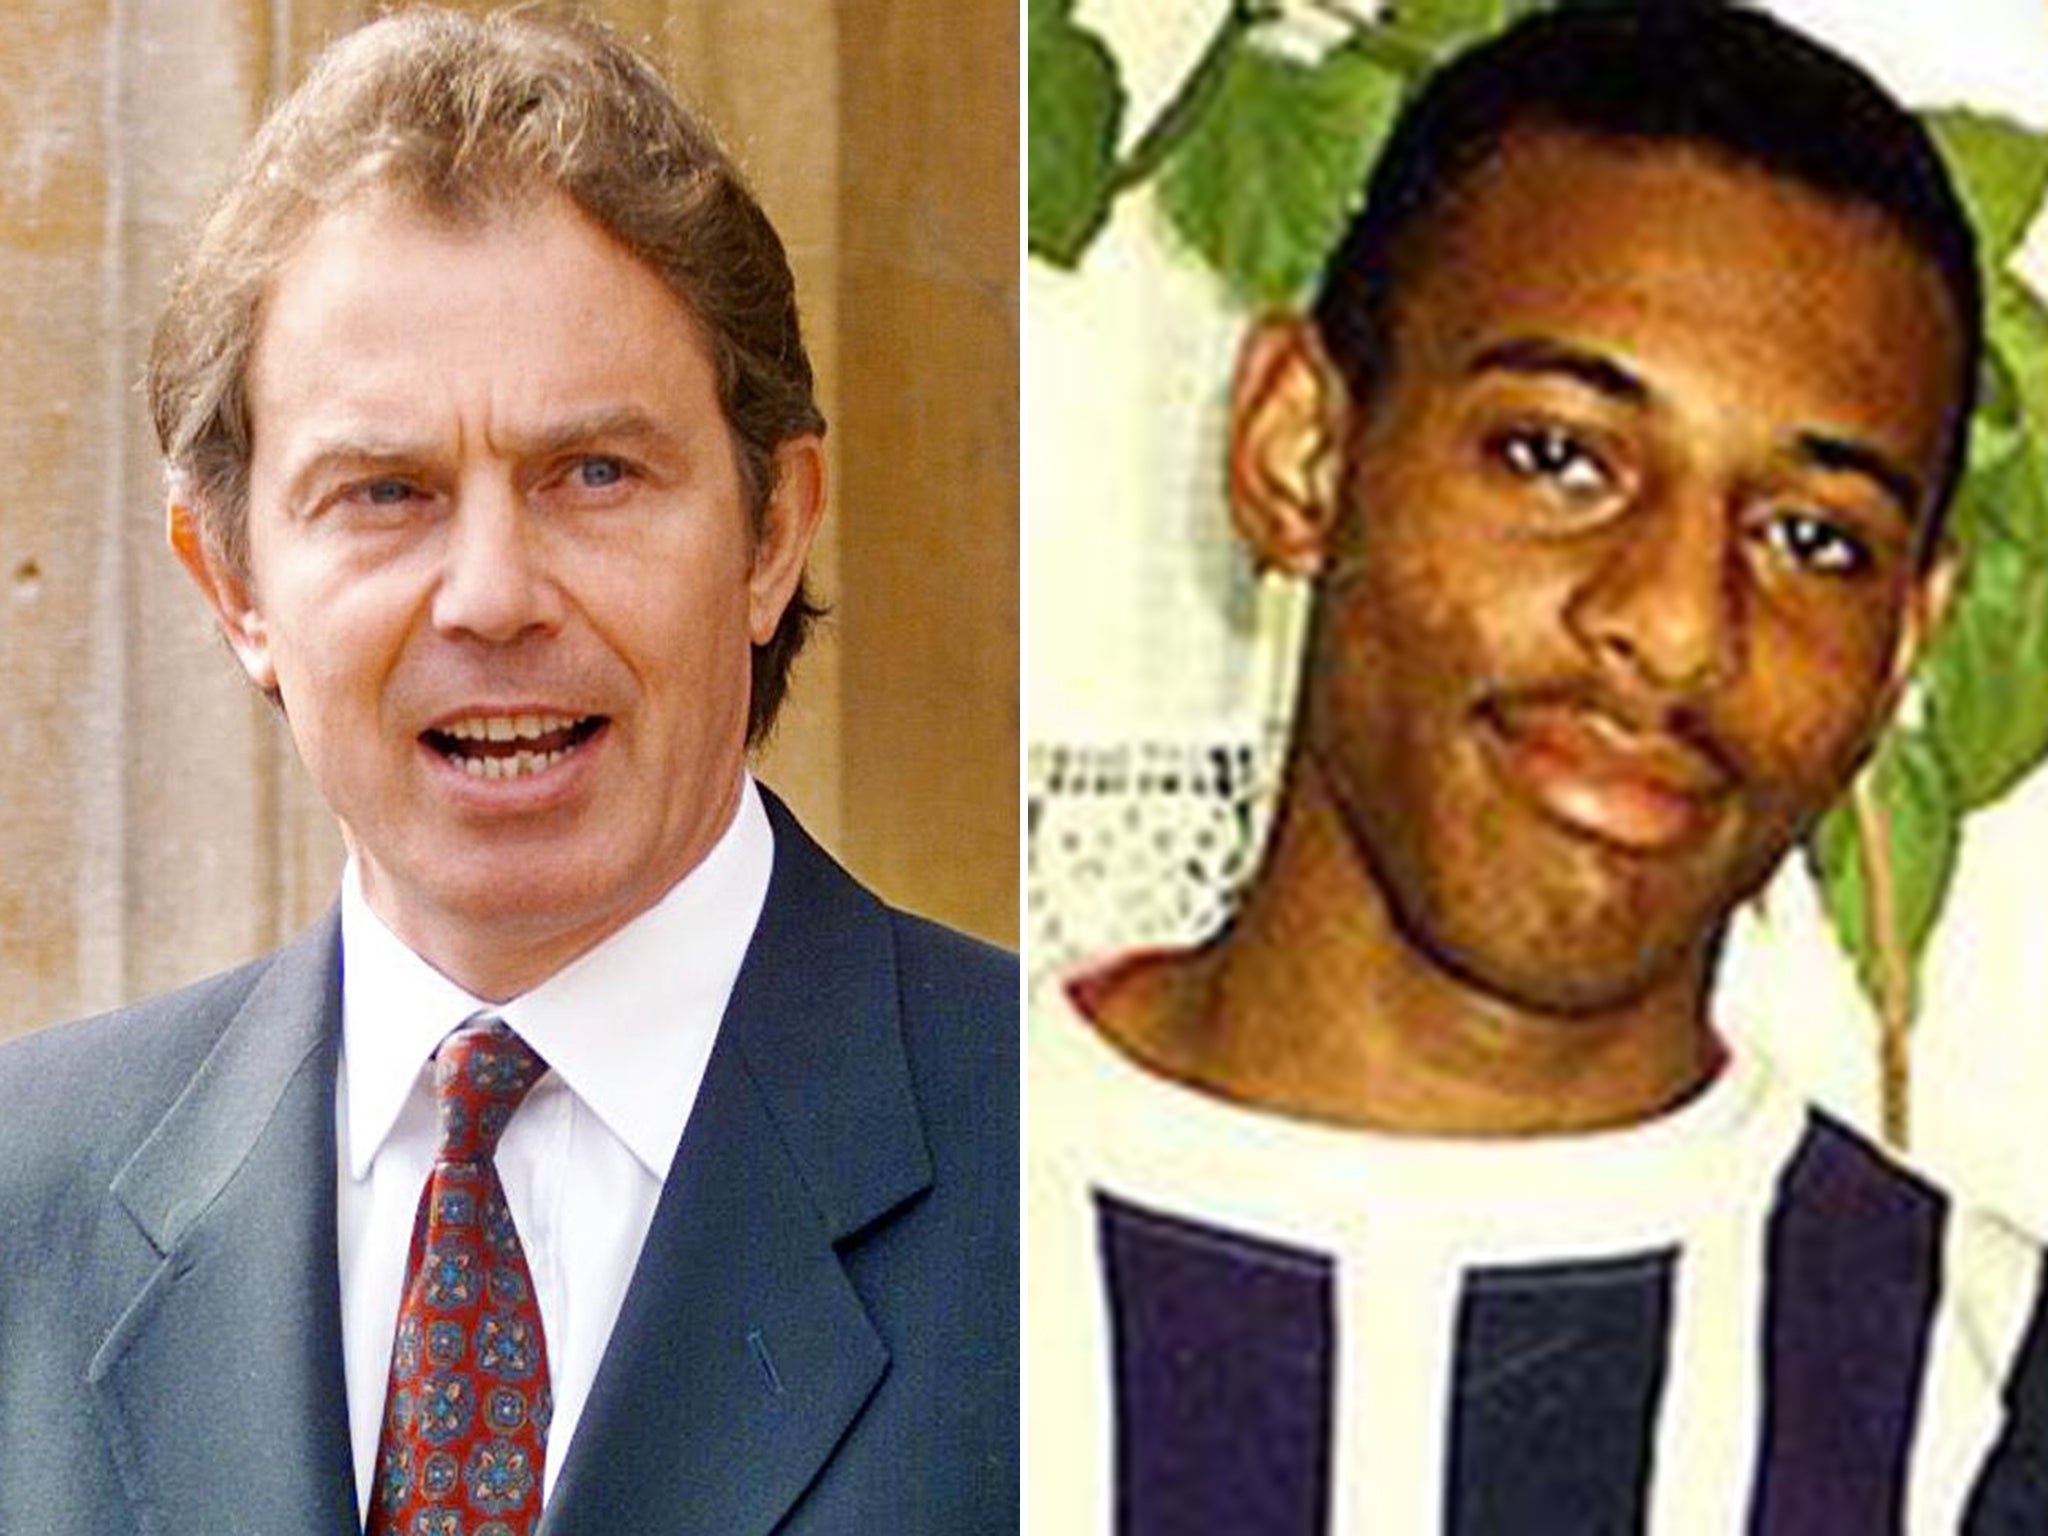 Former prime minister Tony Blair, and Stephen Lawrence